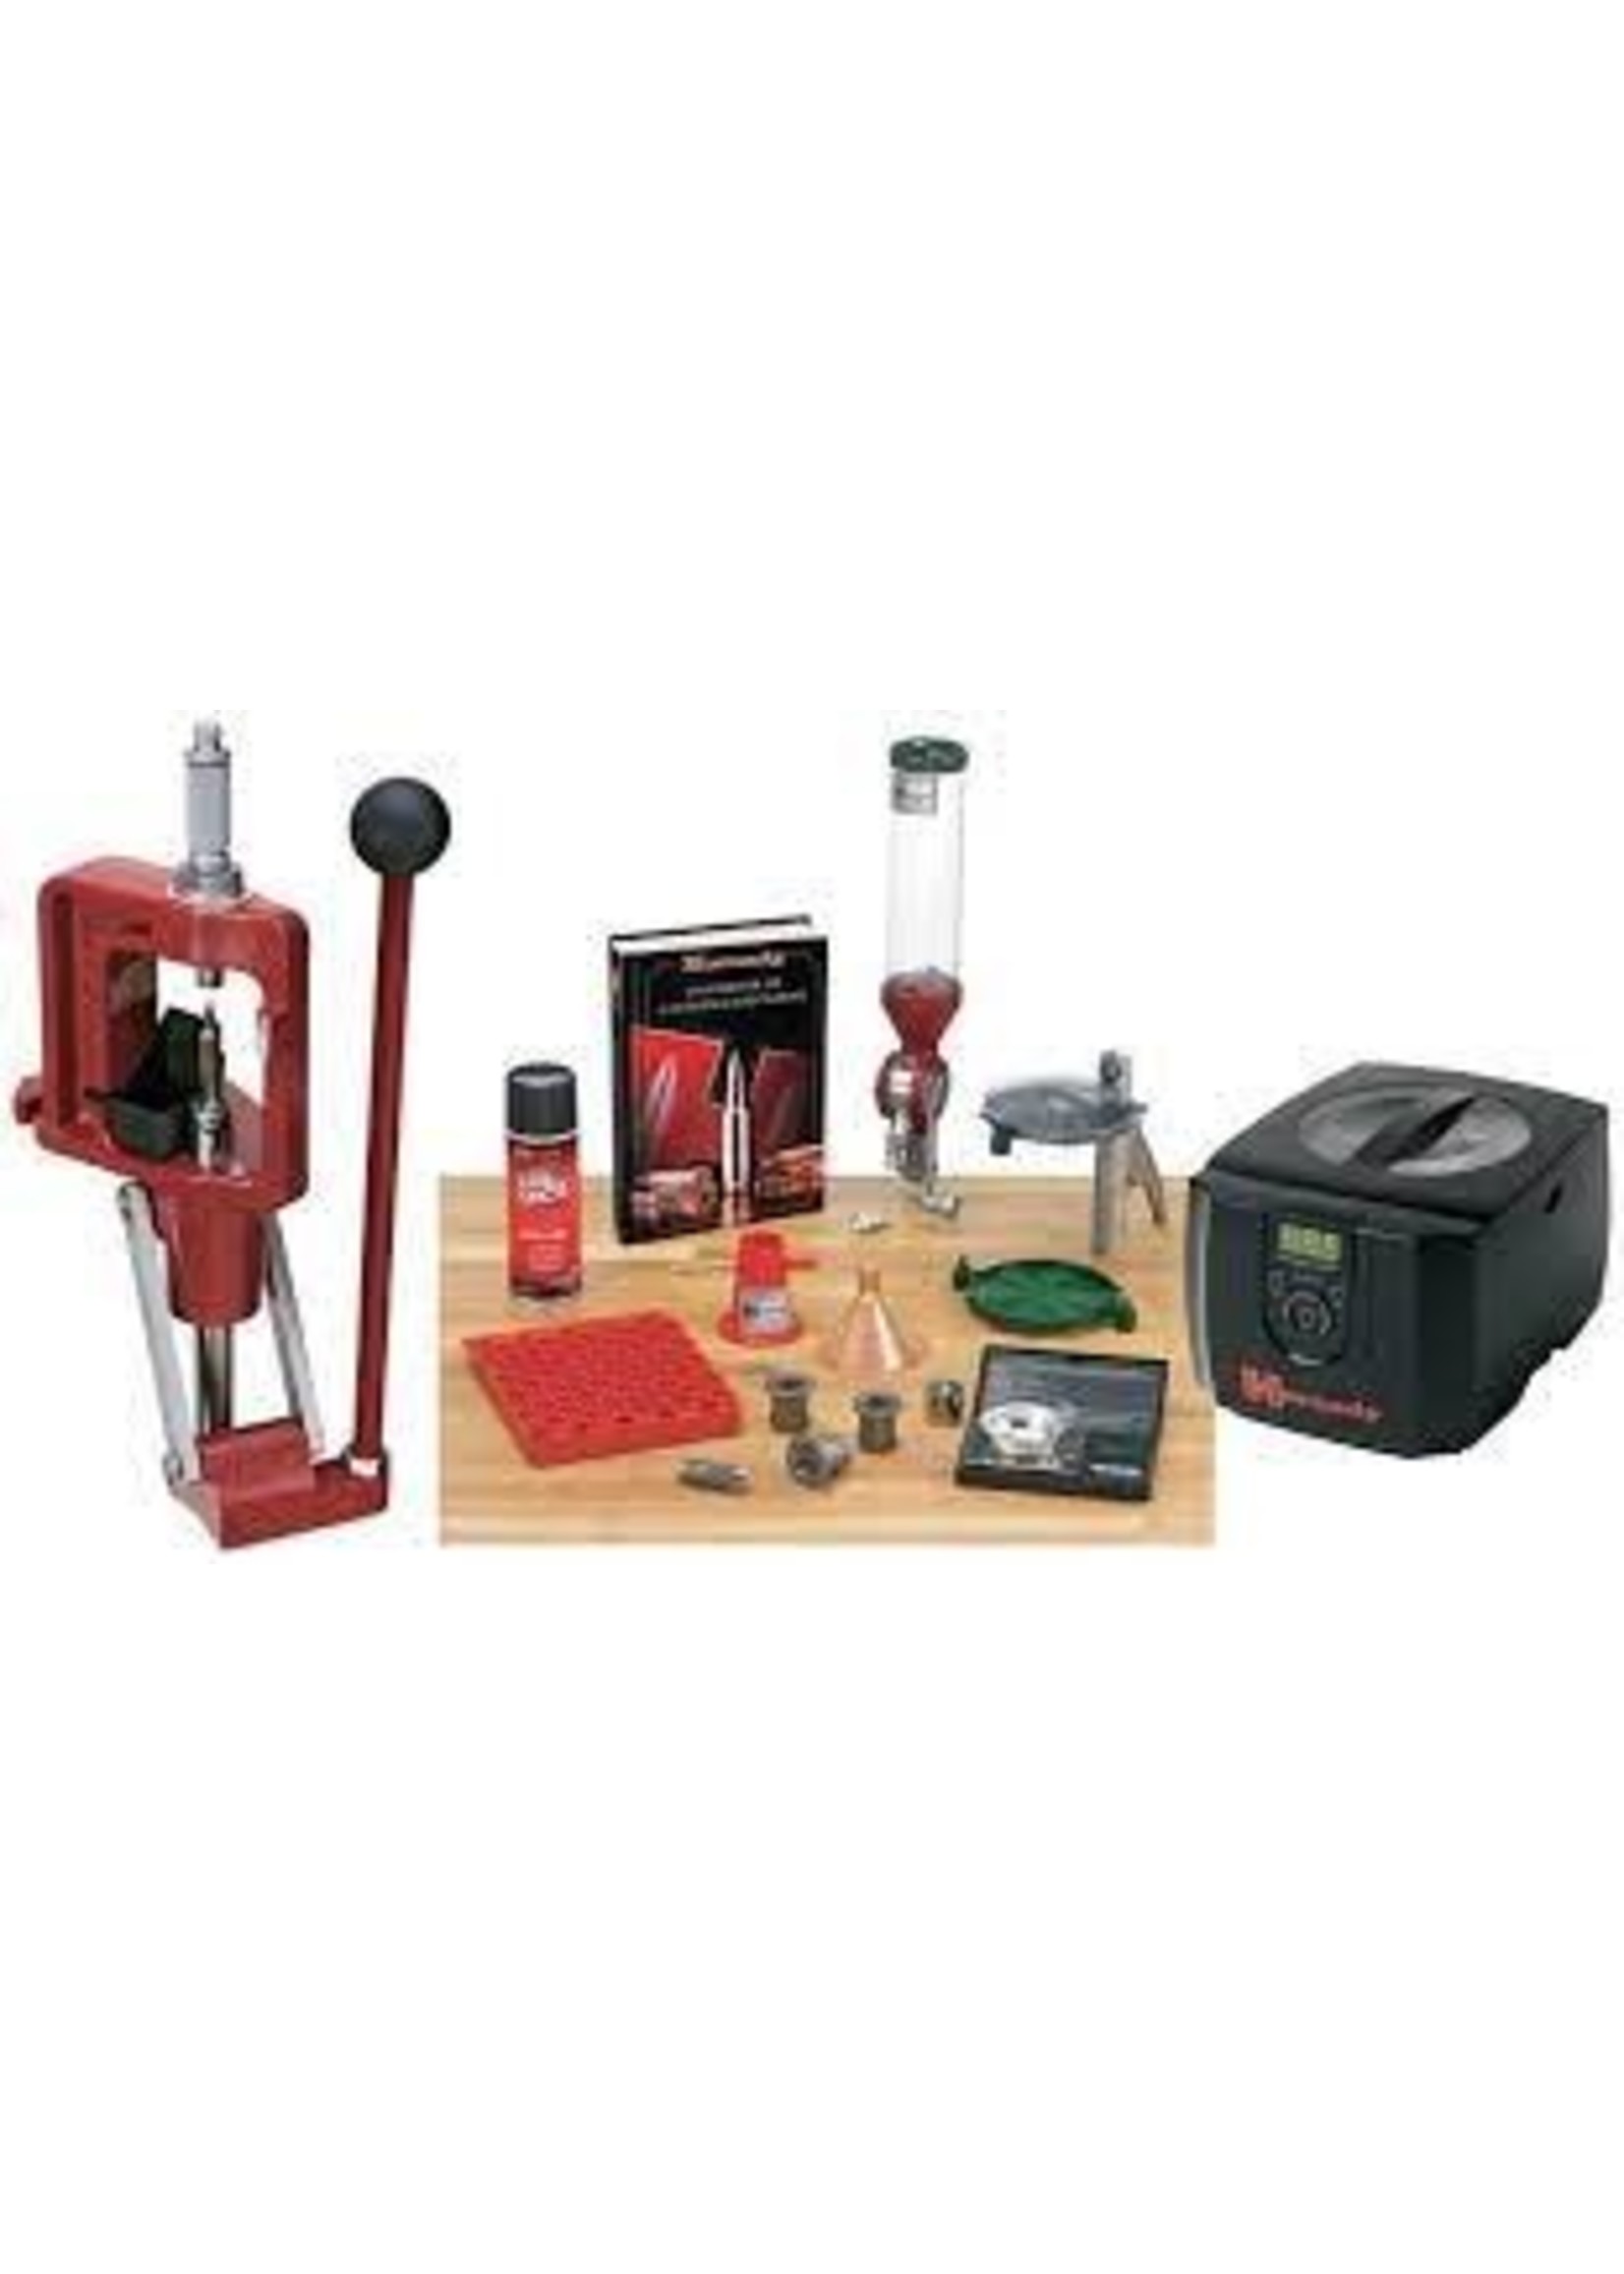 HORNADY HORNADY LOCK-N-LOAD CLASSIC KIT & SONIC CLEANER COMBO